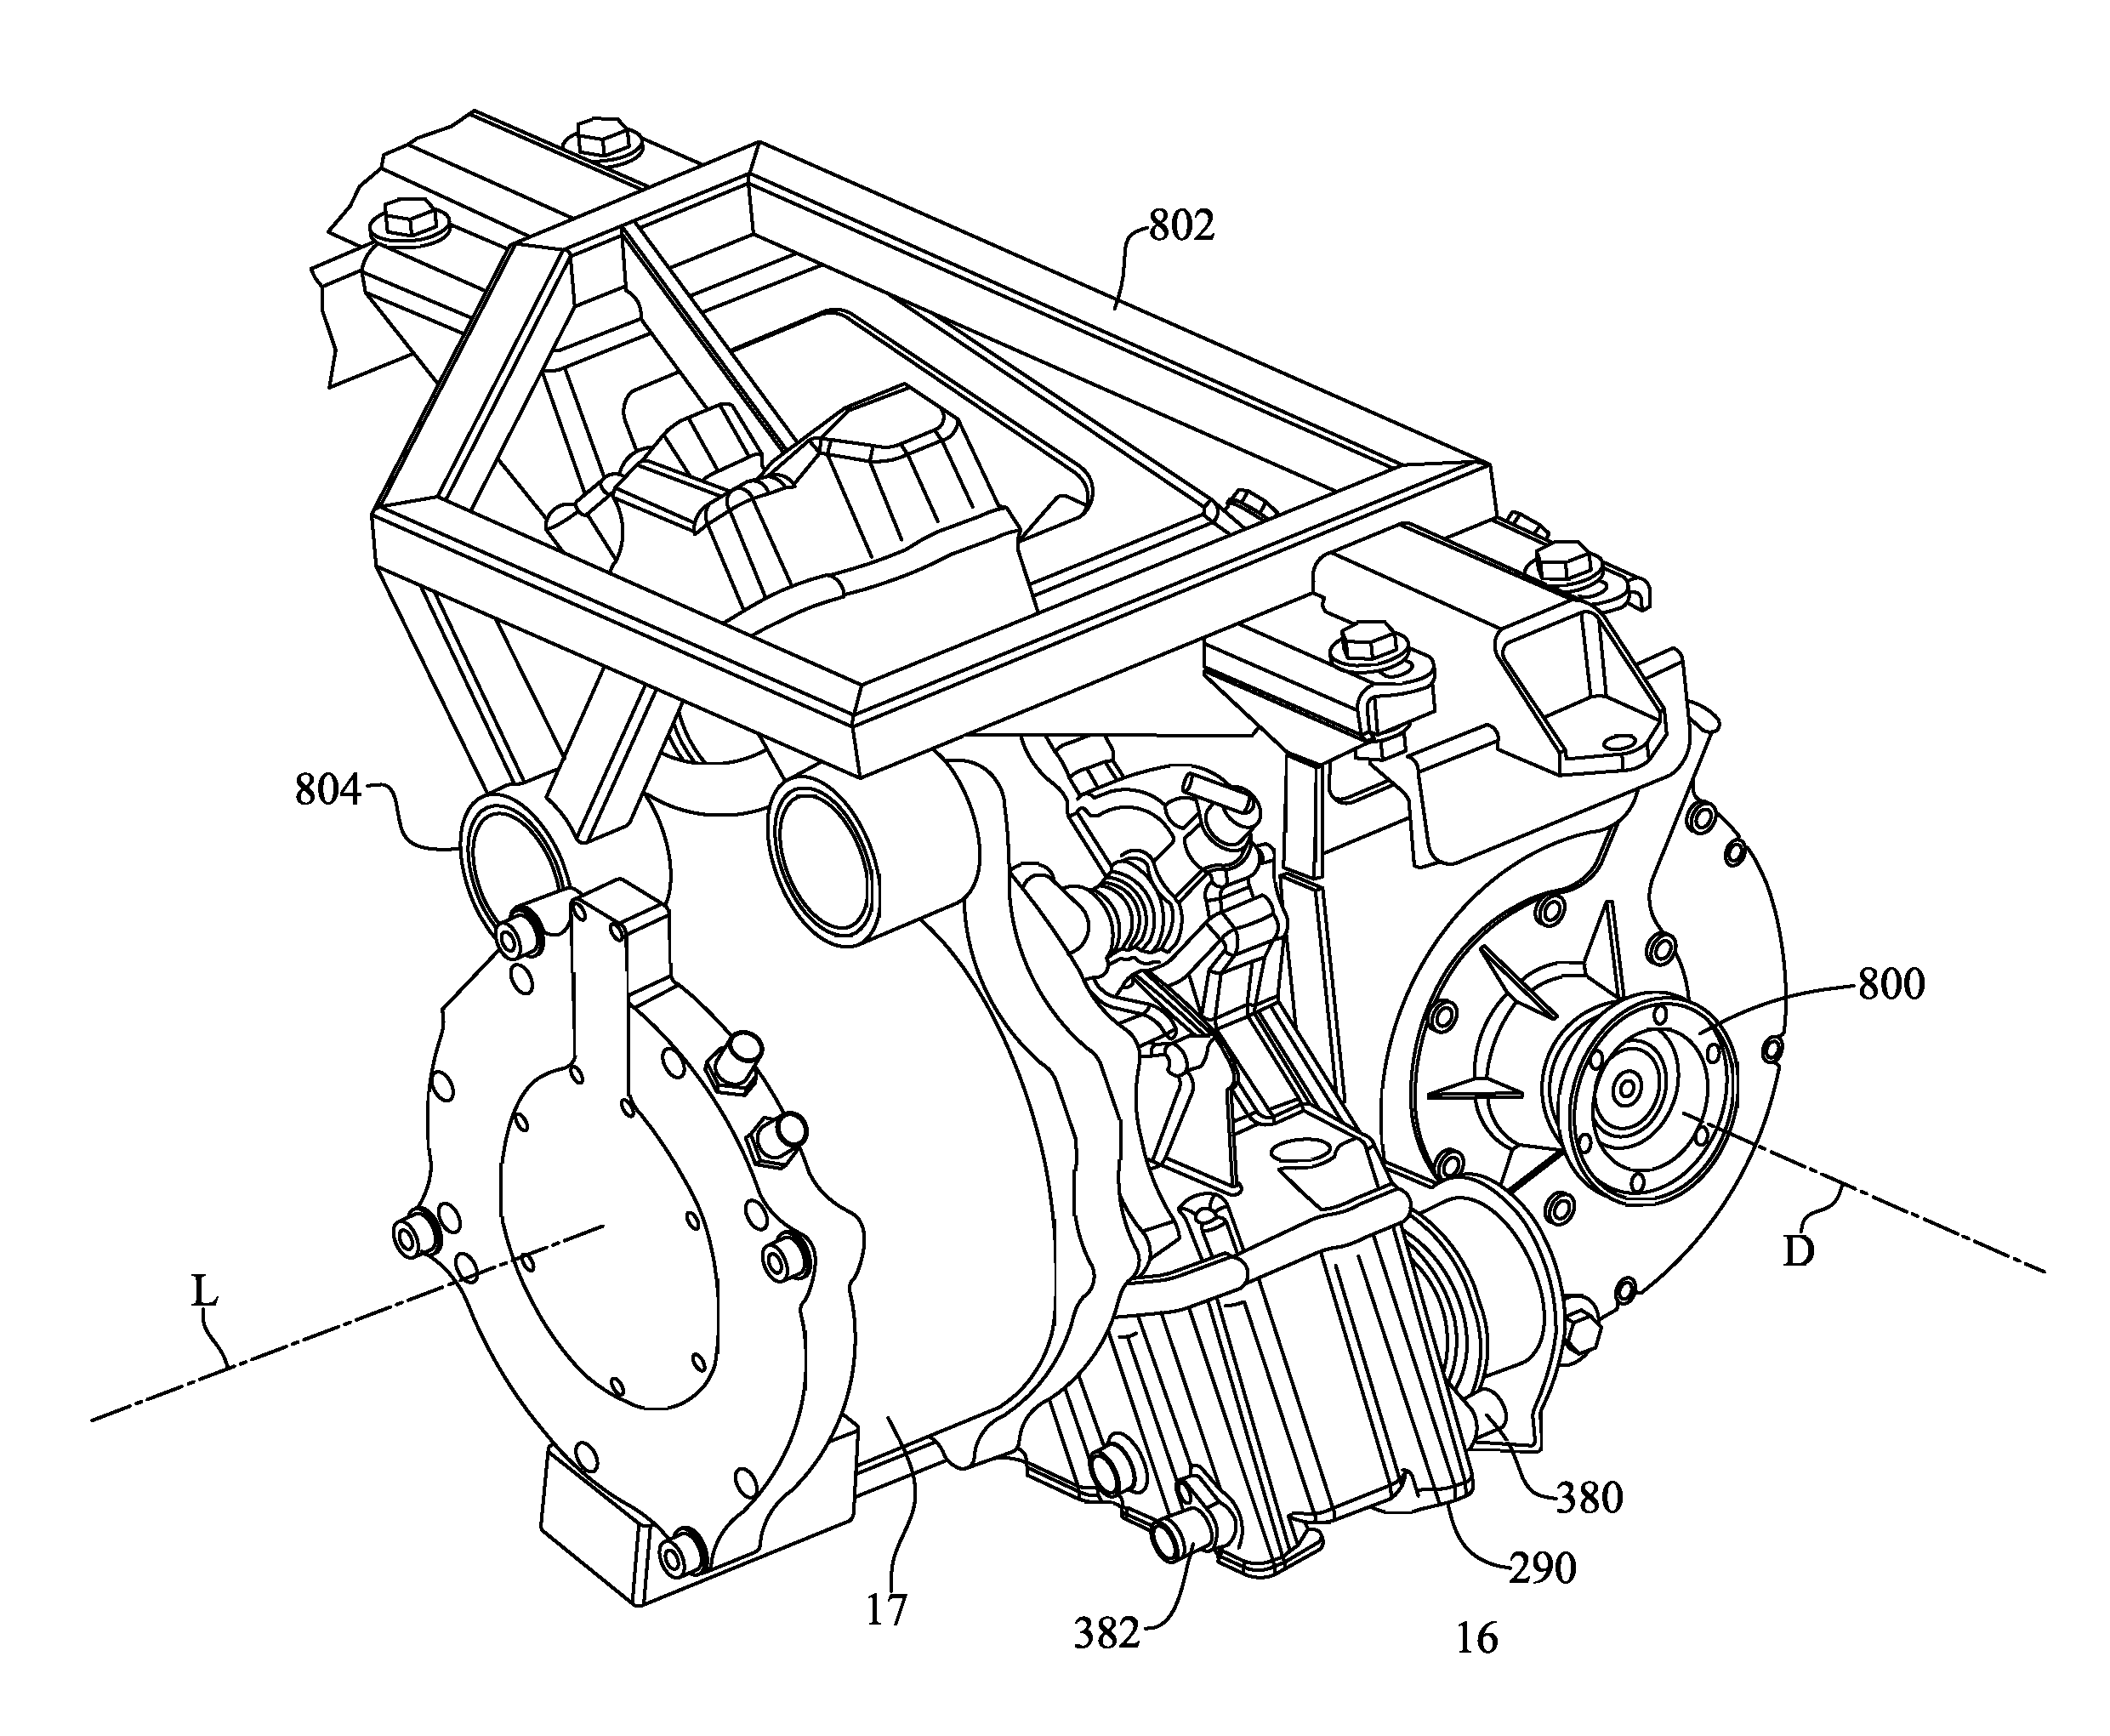 Electric vehicle and on-board battery charging apparatus therefor